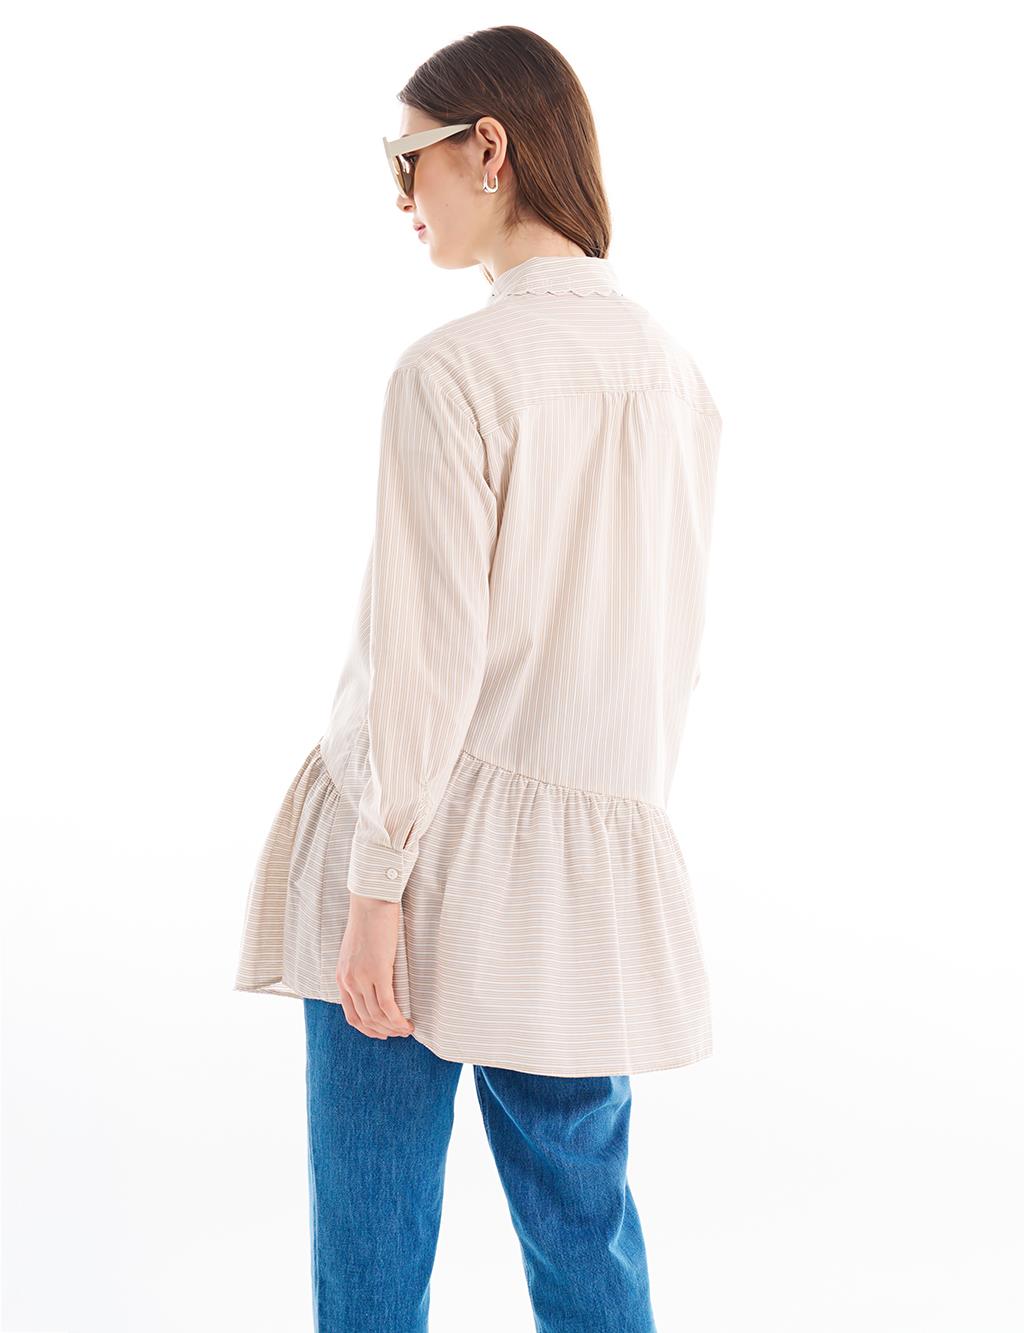 Embroidered Shirt Collar Tunic Sand Beige